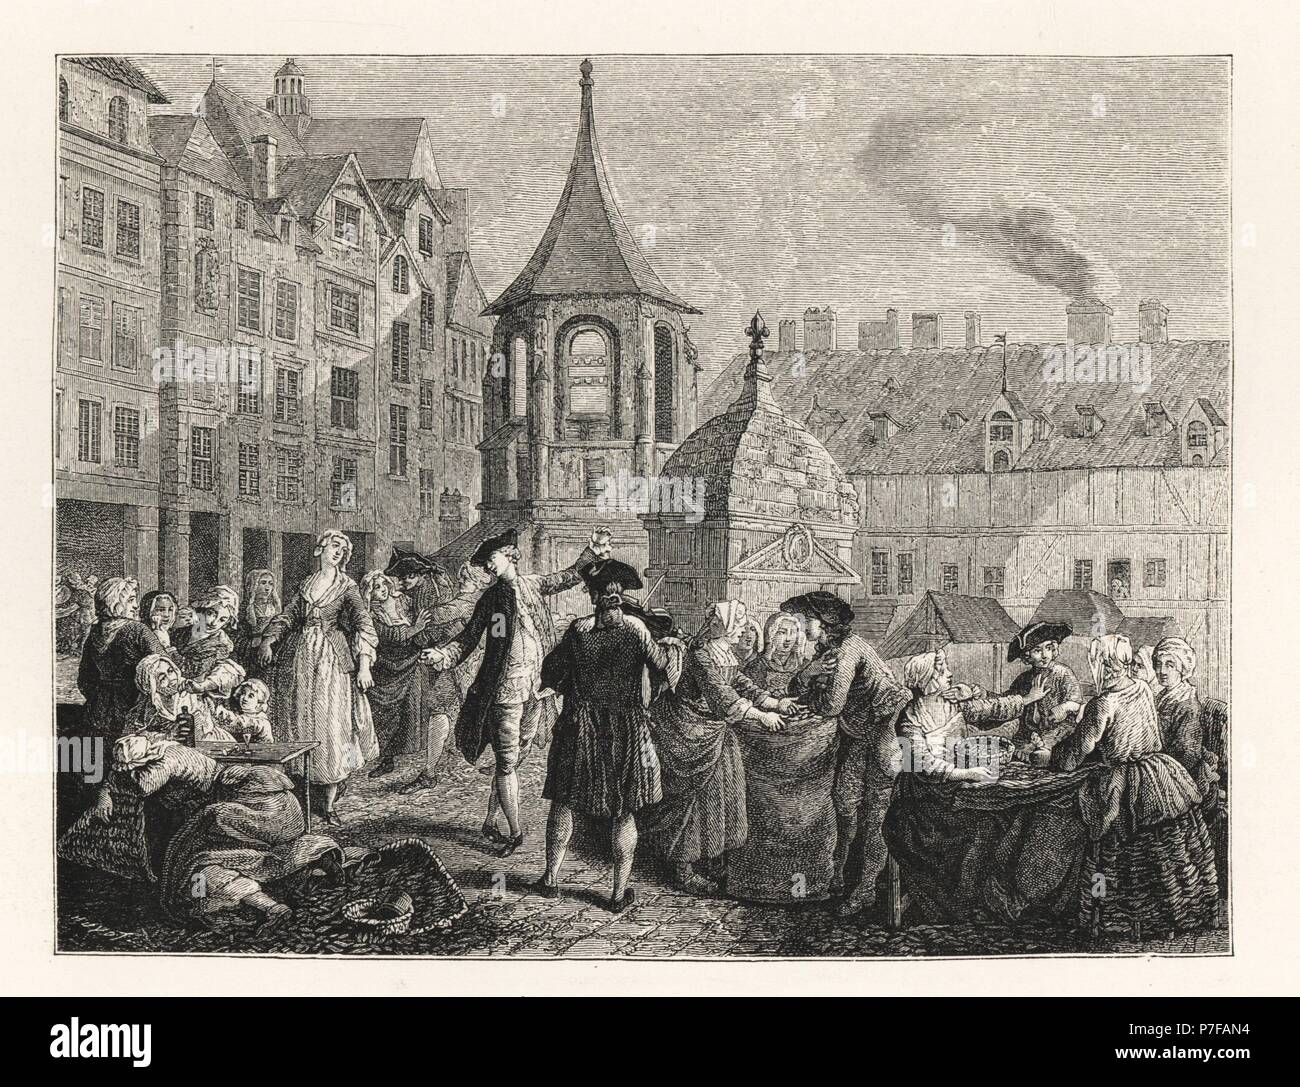 The Marche des Innocents with the Fontaine des Innocents (now place Joachim-du-Bellay, Les Halles), Paris. Lithograph after Etienne Jeaurat from Paul Lacroix' The Eighteenth Century: Its Institutions, Customs, and Costumes, London, 1876. Stock Photo